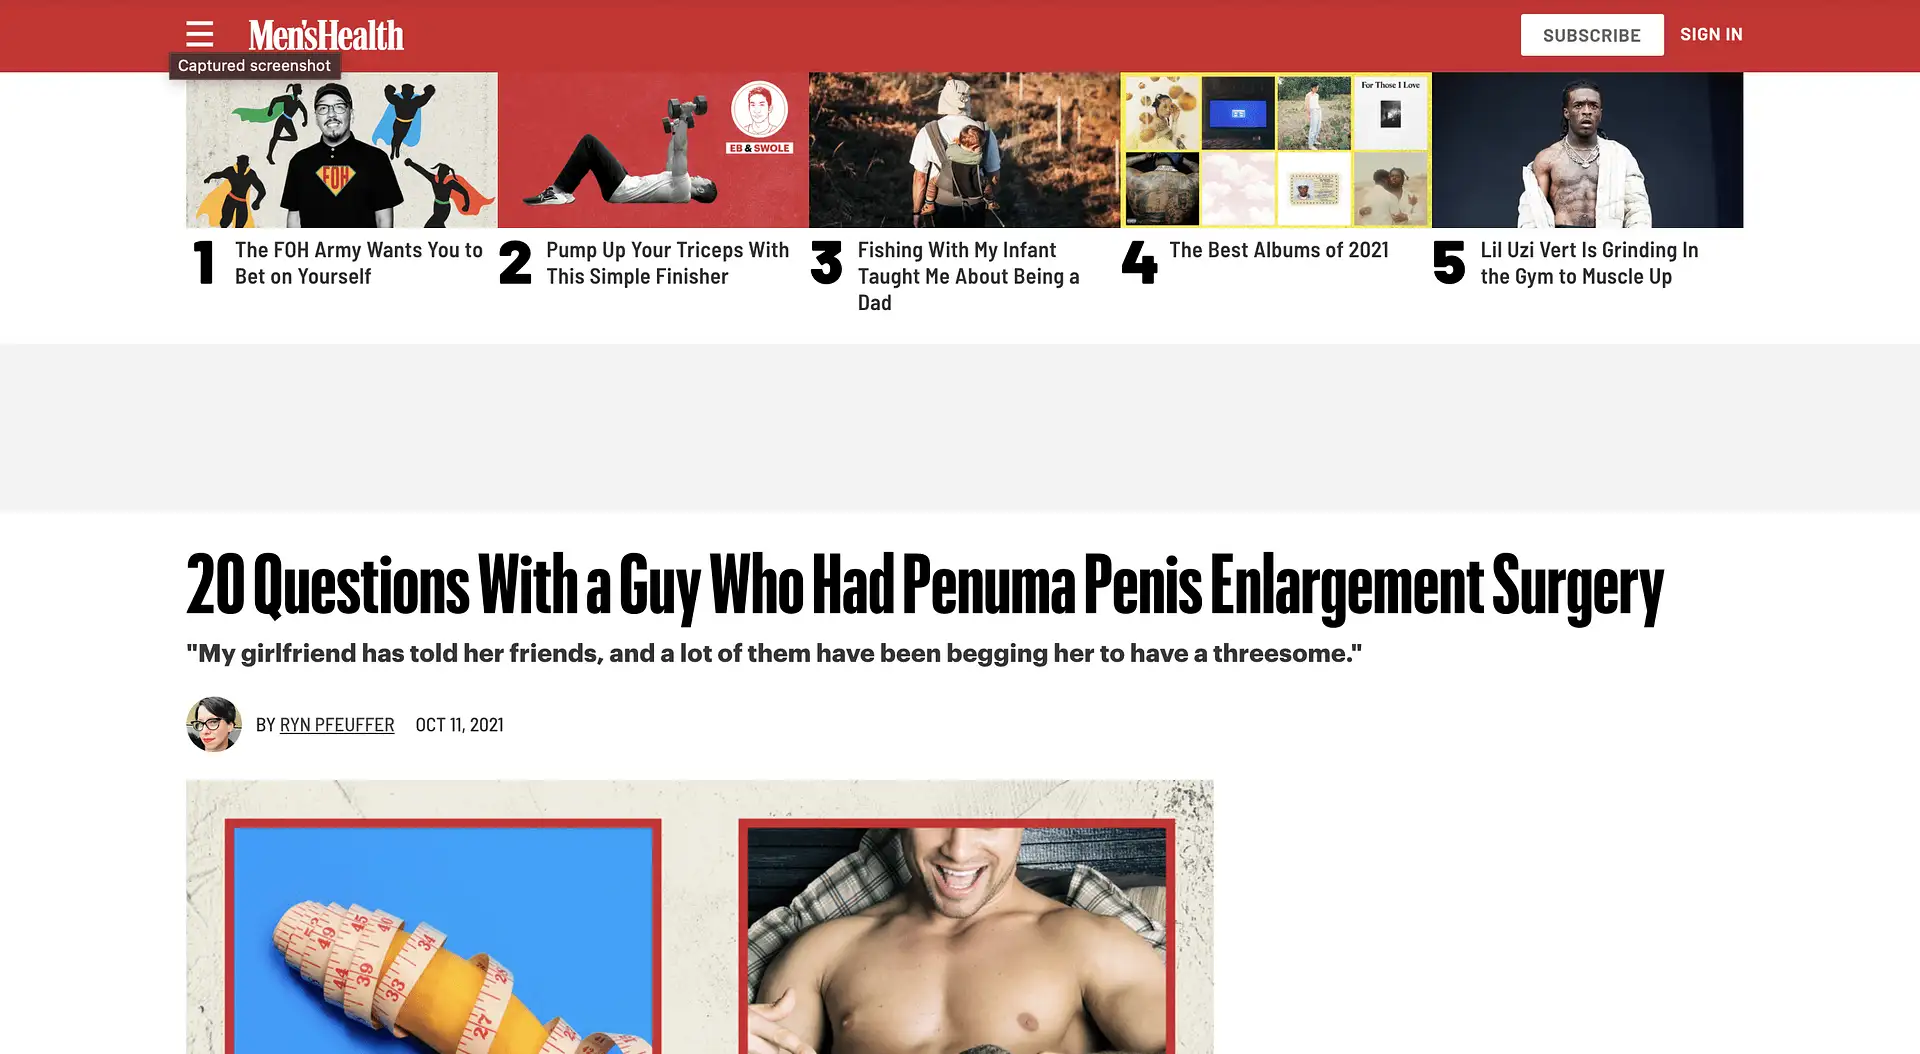 20 Questions with a guy who had Penuma penis enlargement